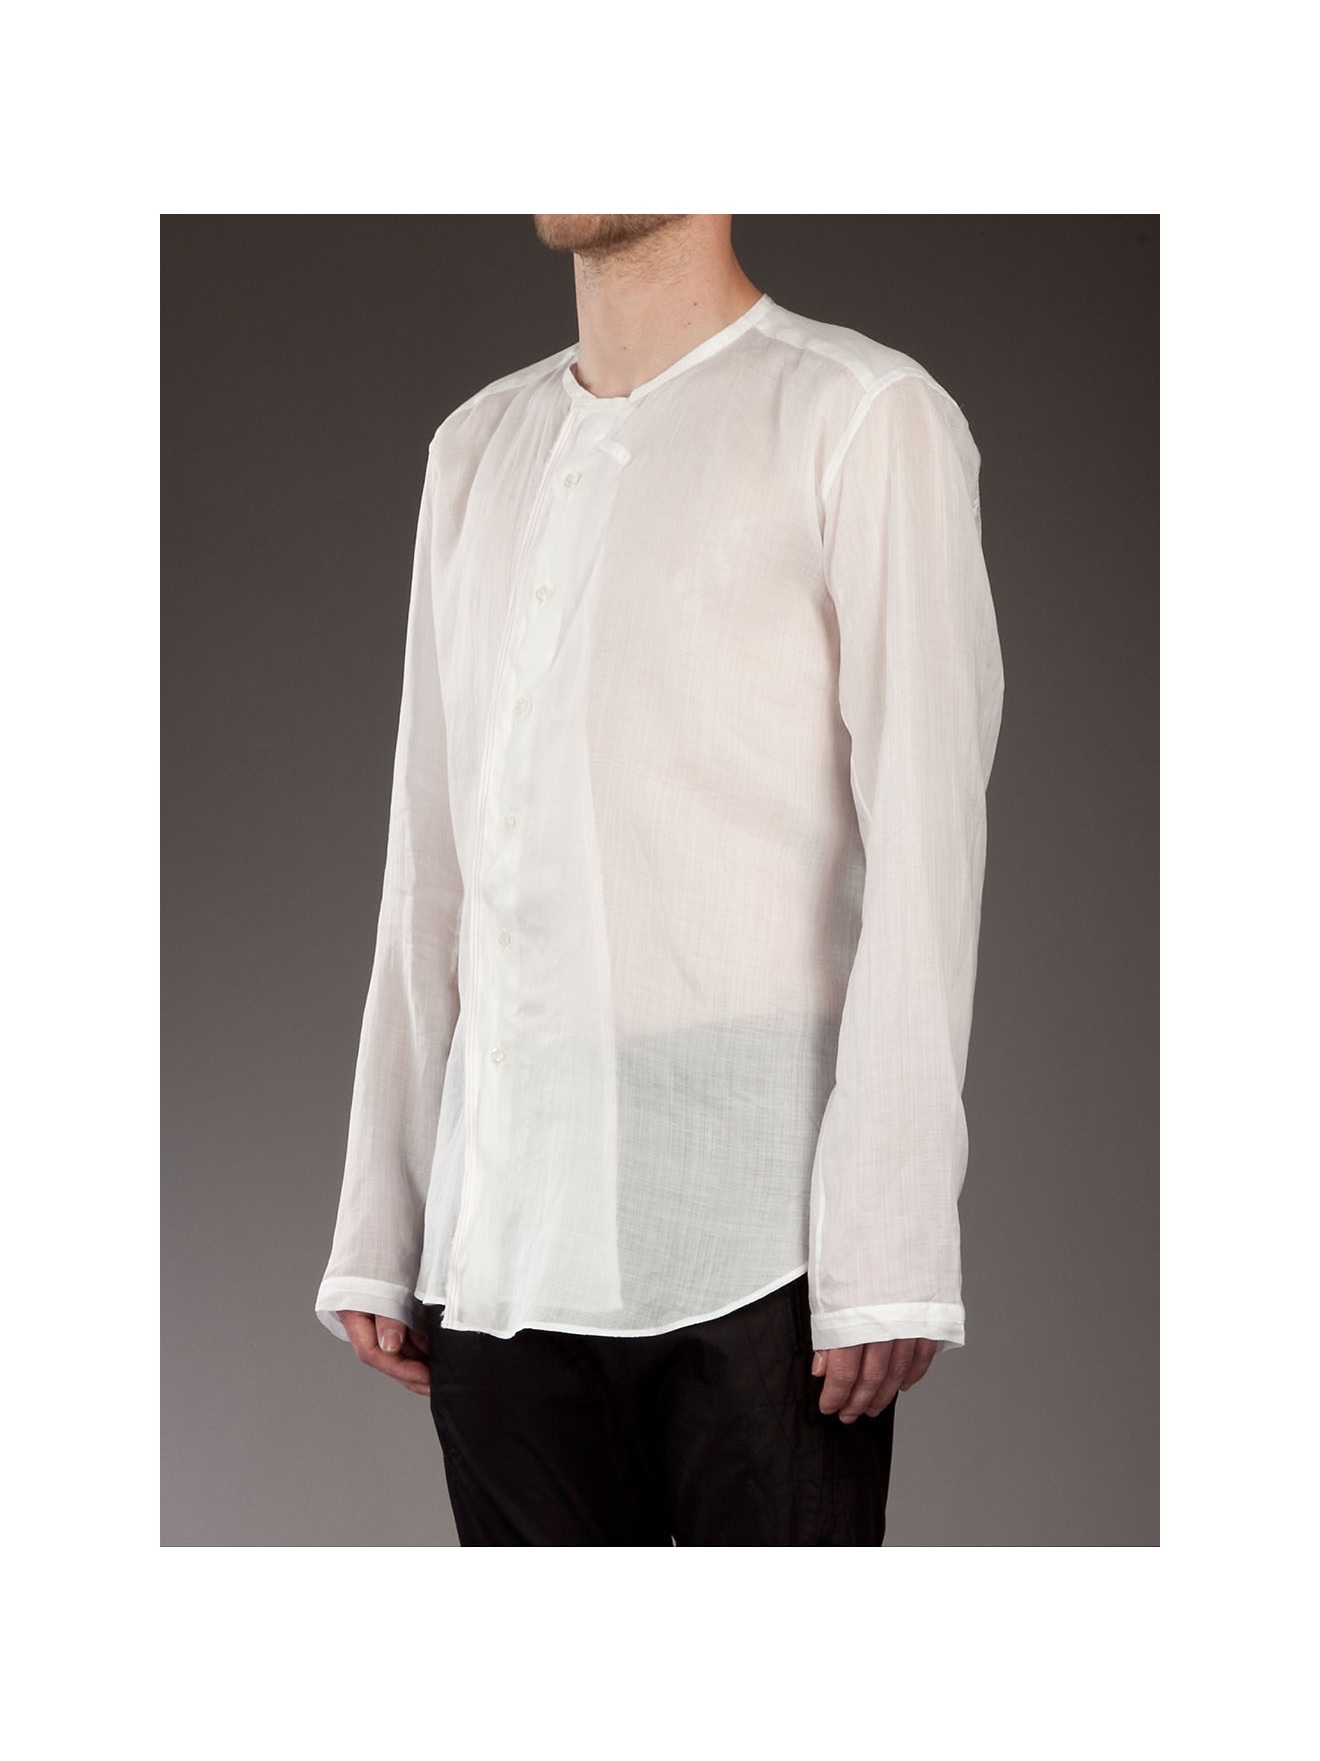 G.guaglianone Linen Collarless Shirt in White for Men | Lyst